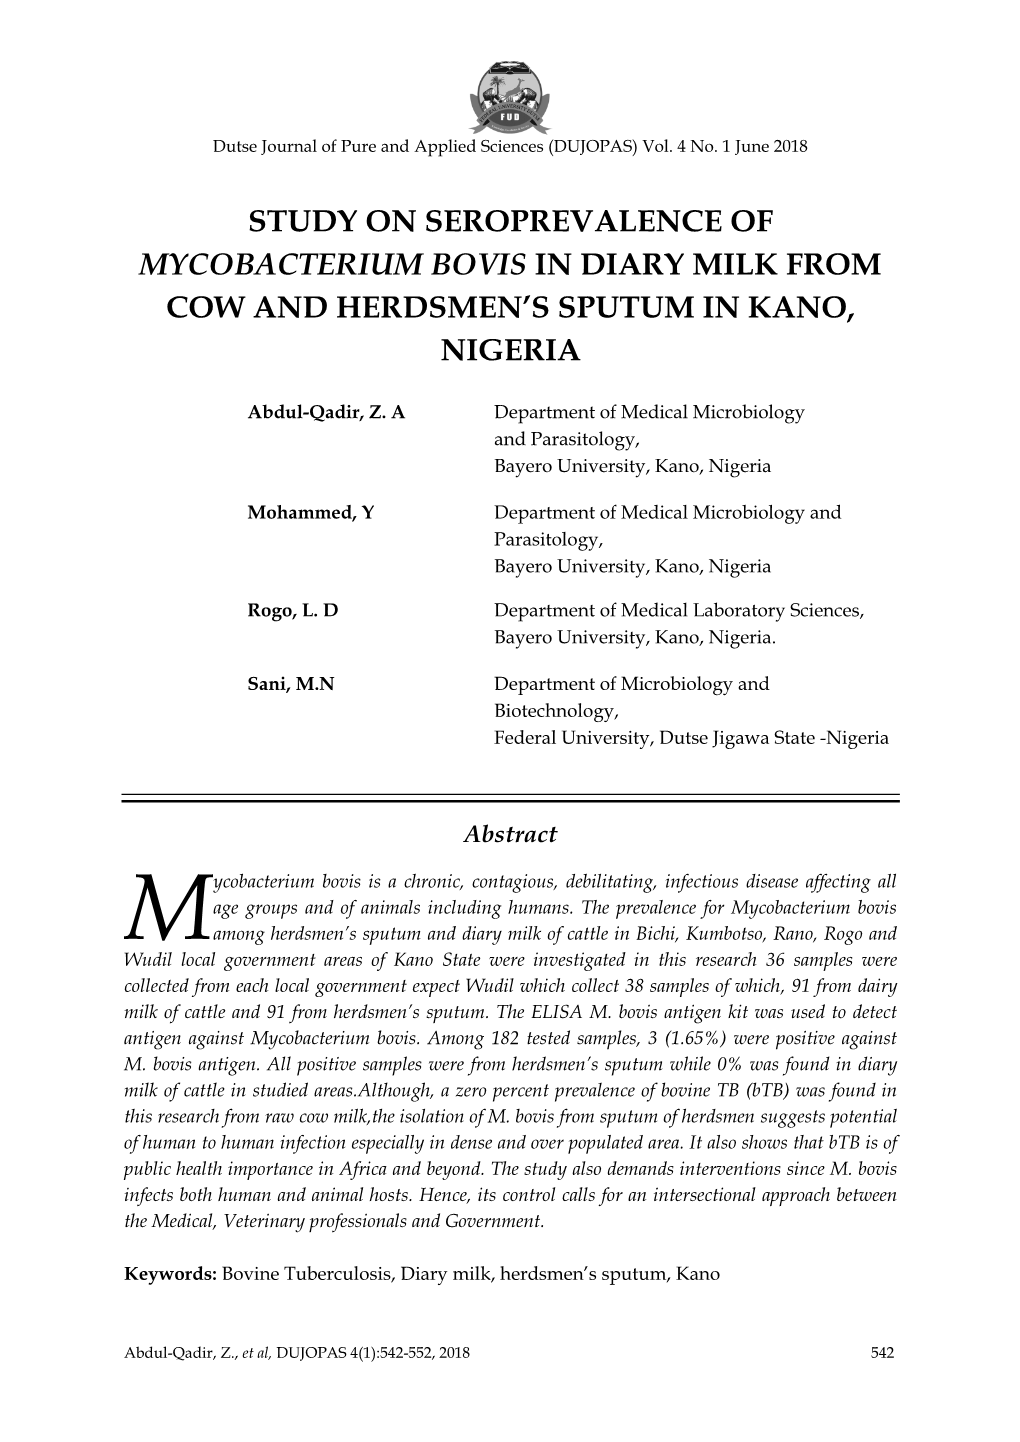 Study on Seroprevalence of Mycobacterium Bovis in Diary Milk from Cow and Herdsmen’S Sputum in Kano, Nigeria